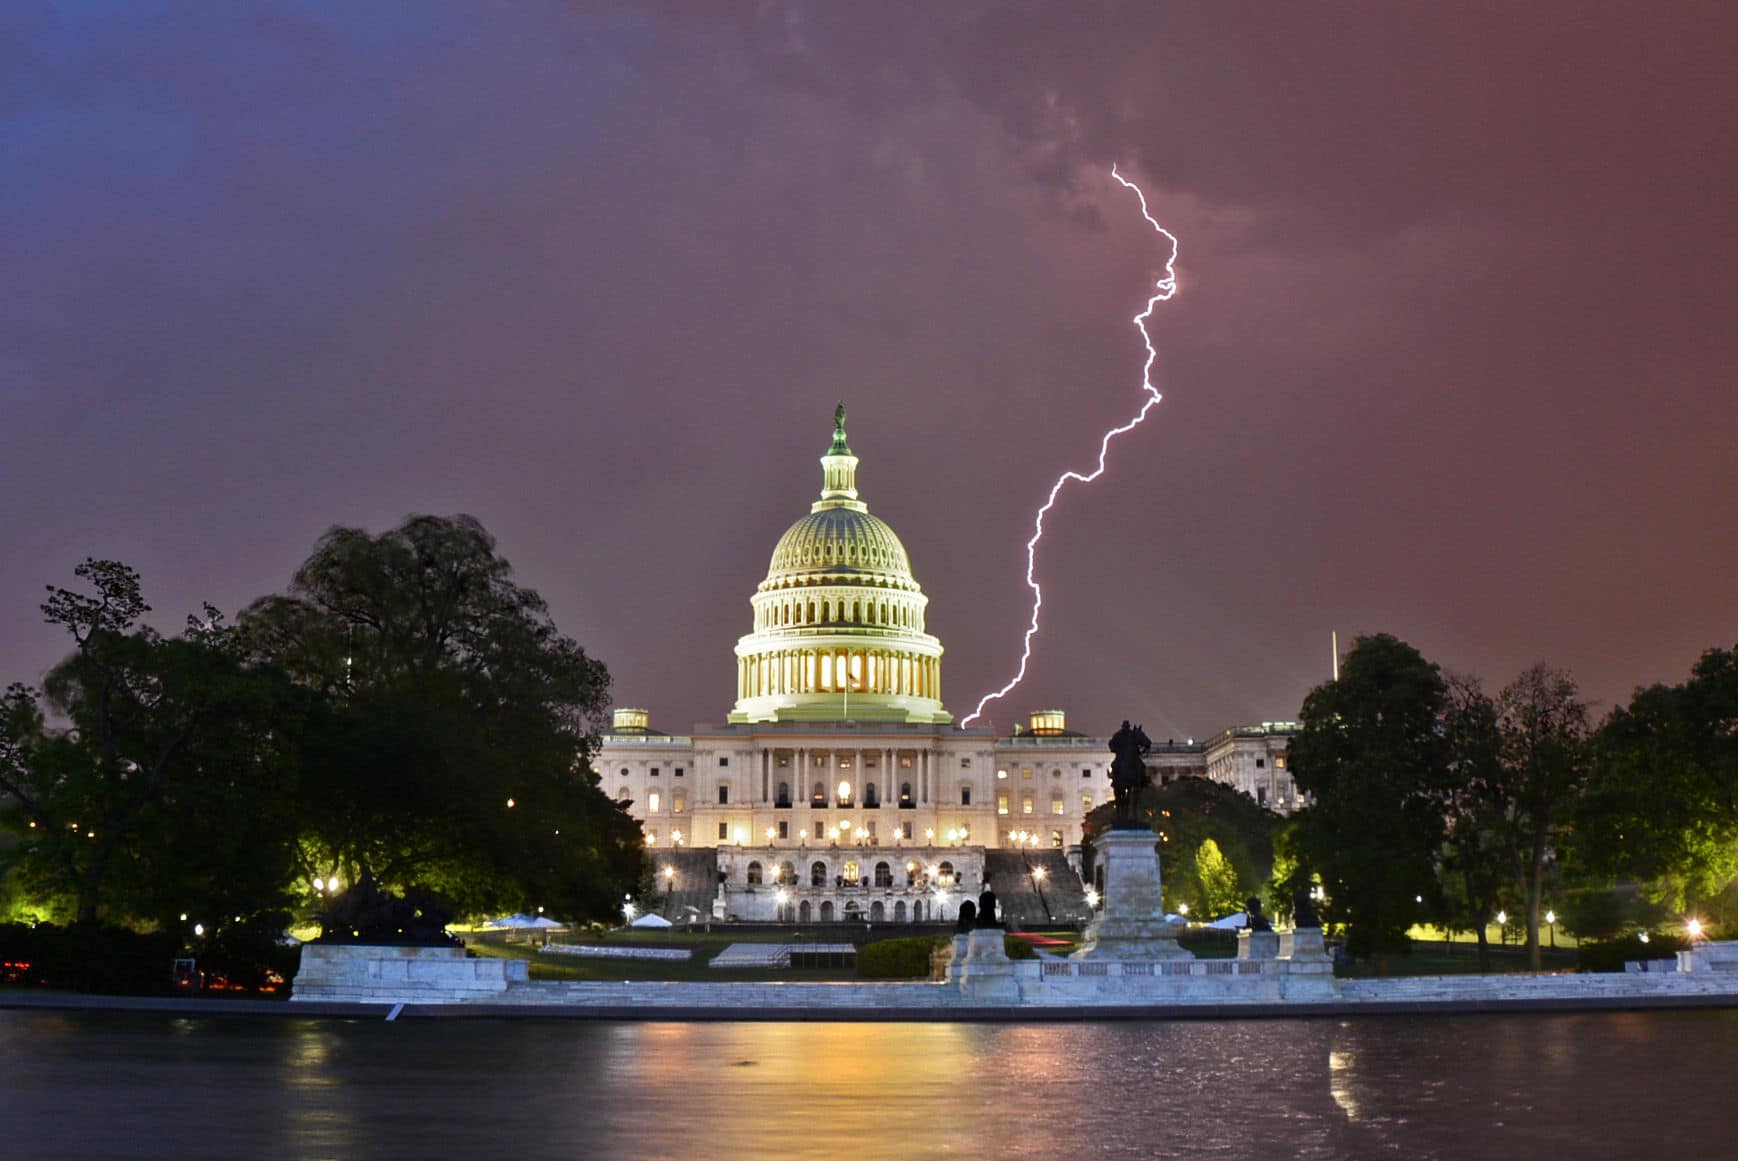 Spring thunderstorms danced across the skies during a stormy period beginning on Mother's Day weekend. Lightning flickered behind the U.S. Capitol late that Saturday. High winds ahead of the storms forced officials to stop traffic on Route 50 at the Bay Bridge for a time. (WTOP/Dave Dildine)